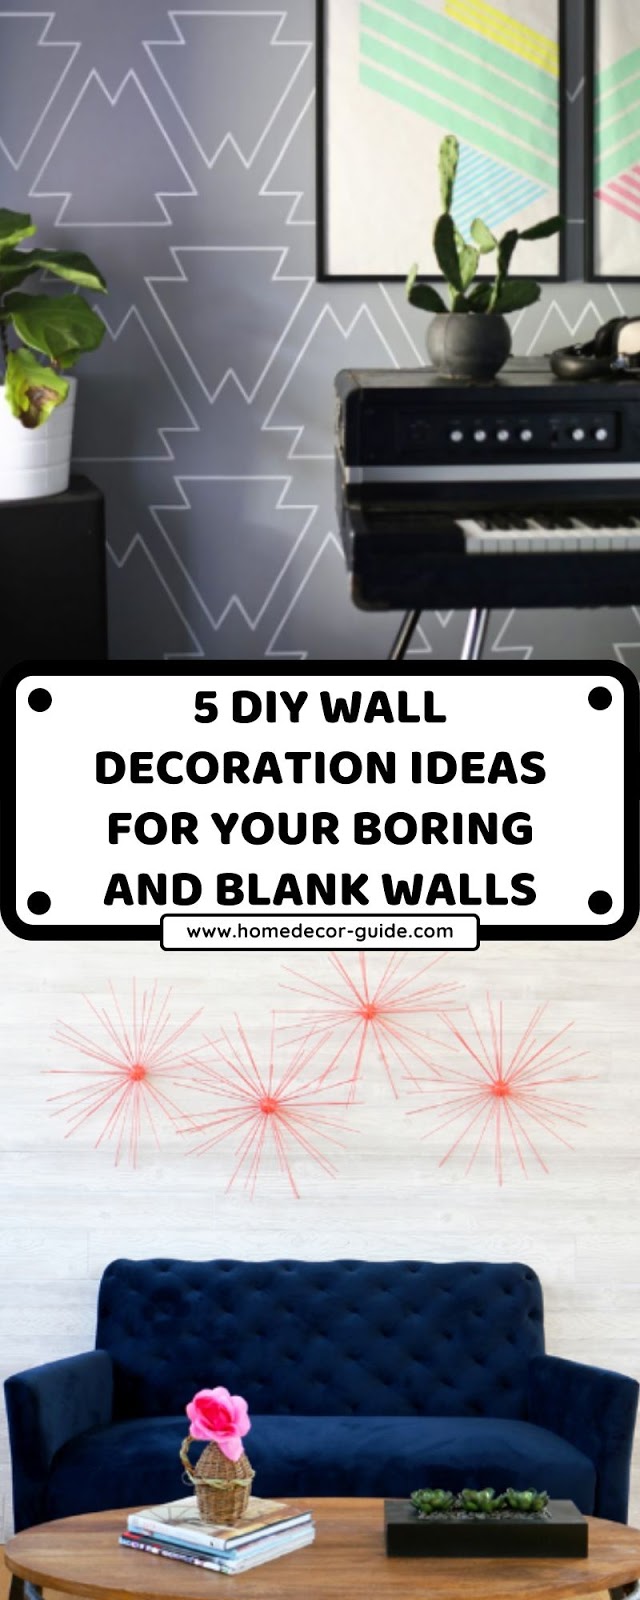 5 DIY WALL DECORATION IDEAS FOR YOUR BORING AND BLANK WALLS